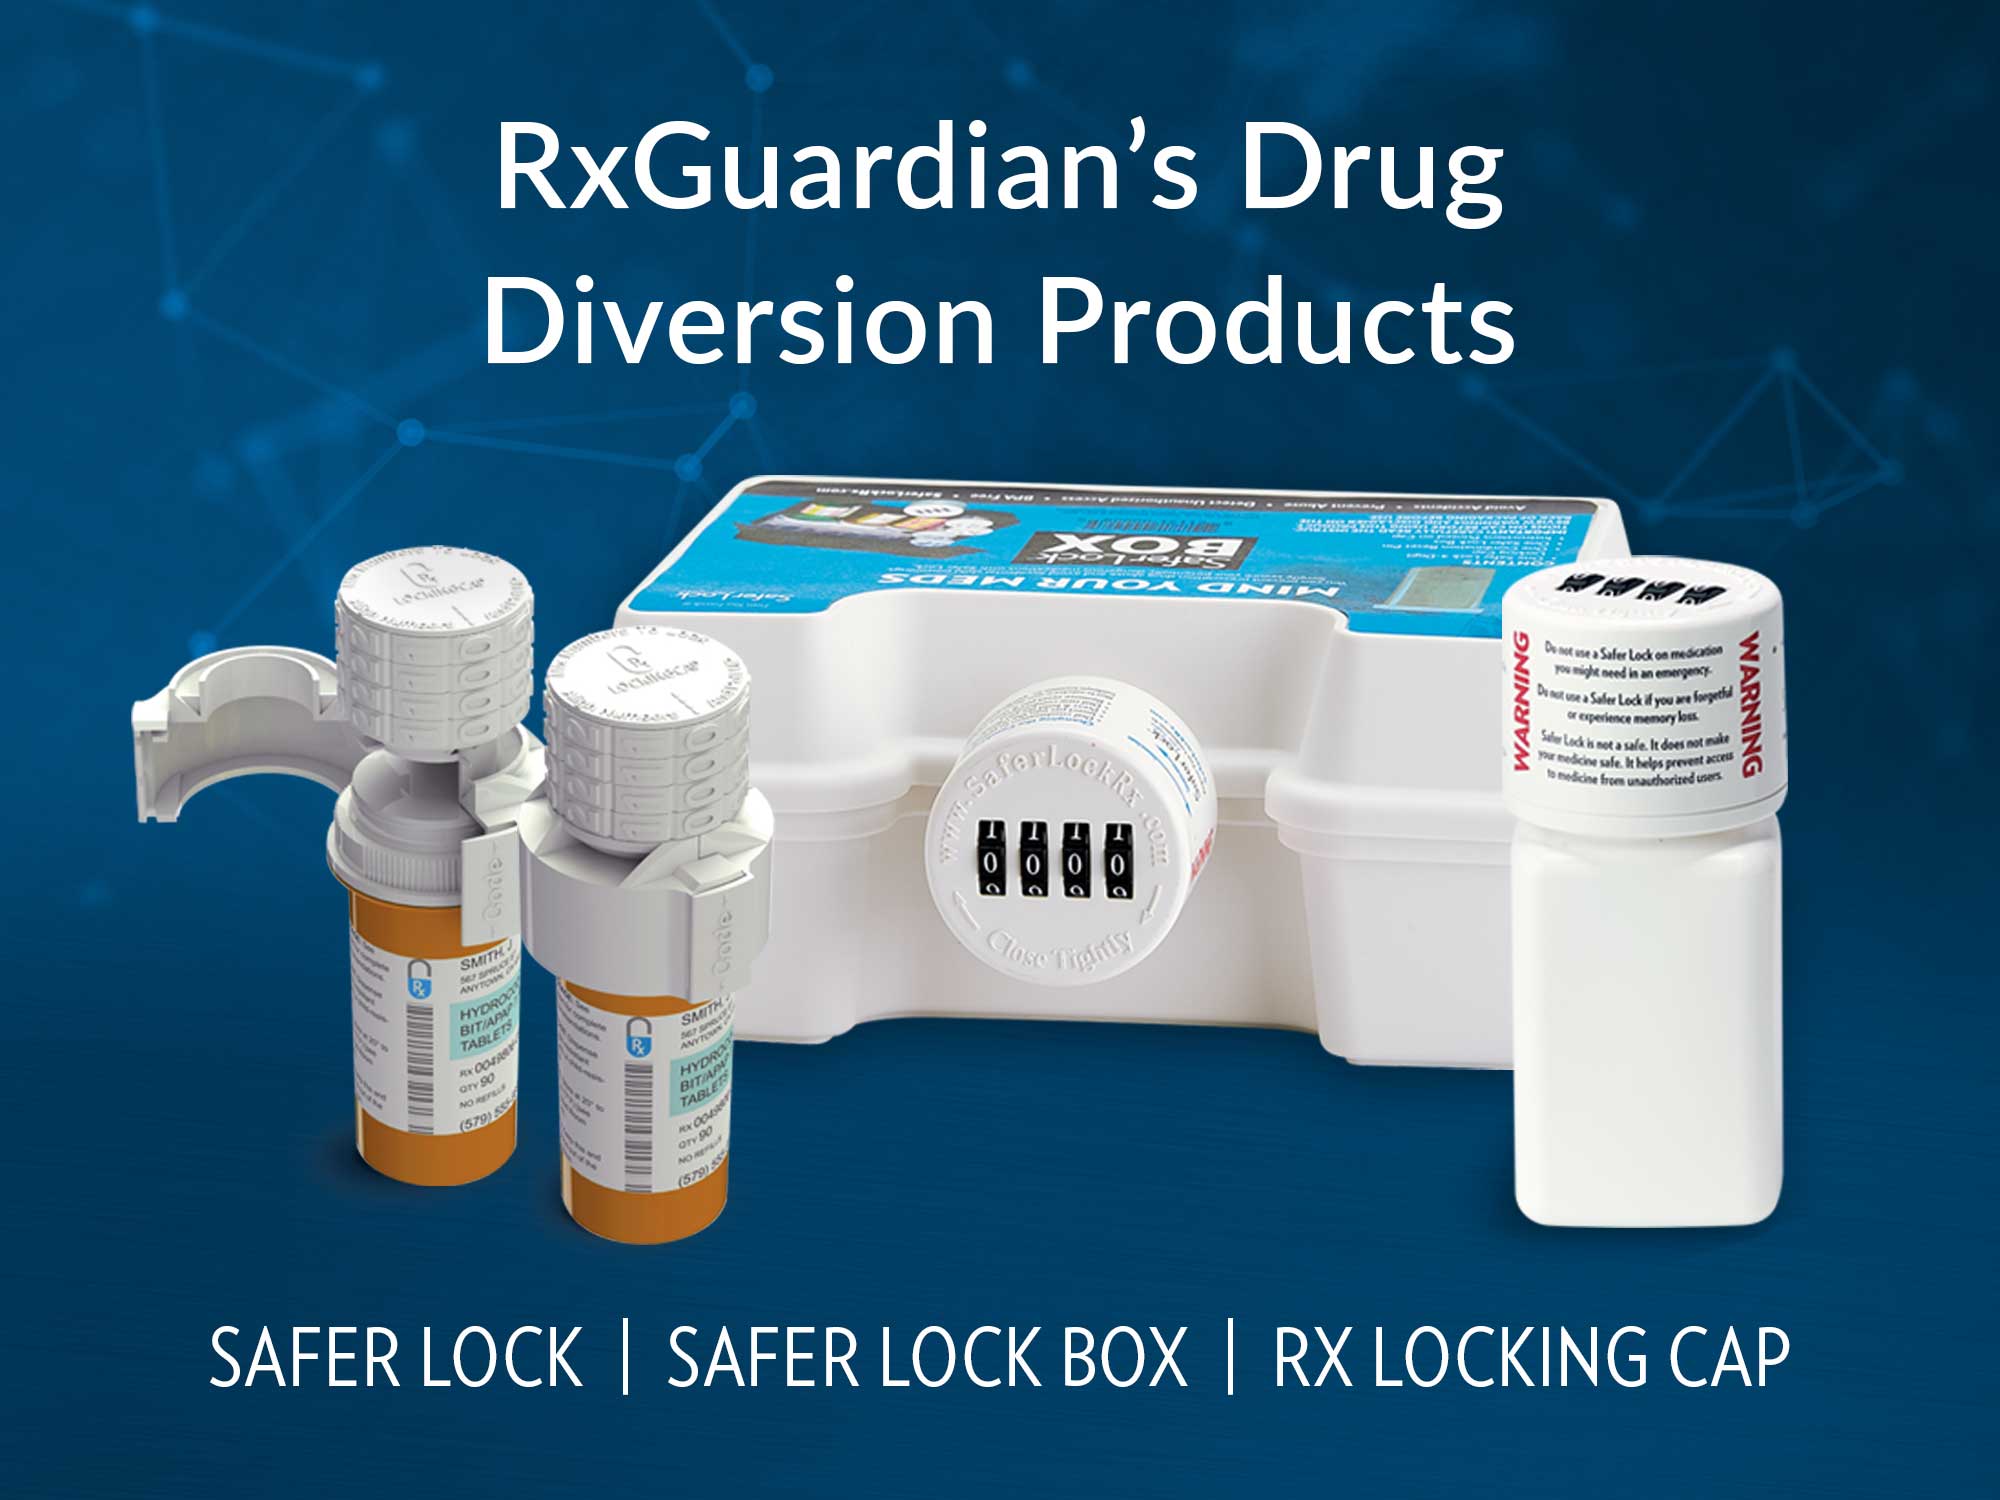 RxGuardian's Products